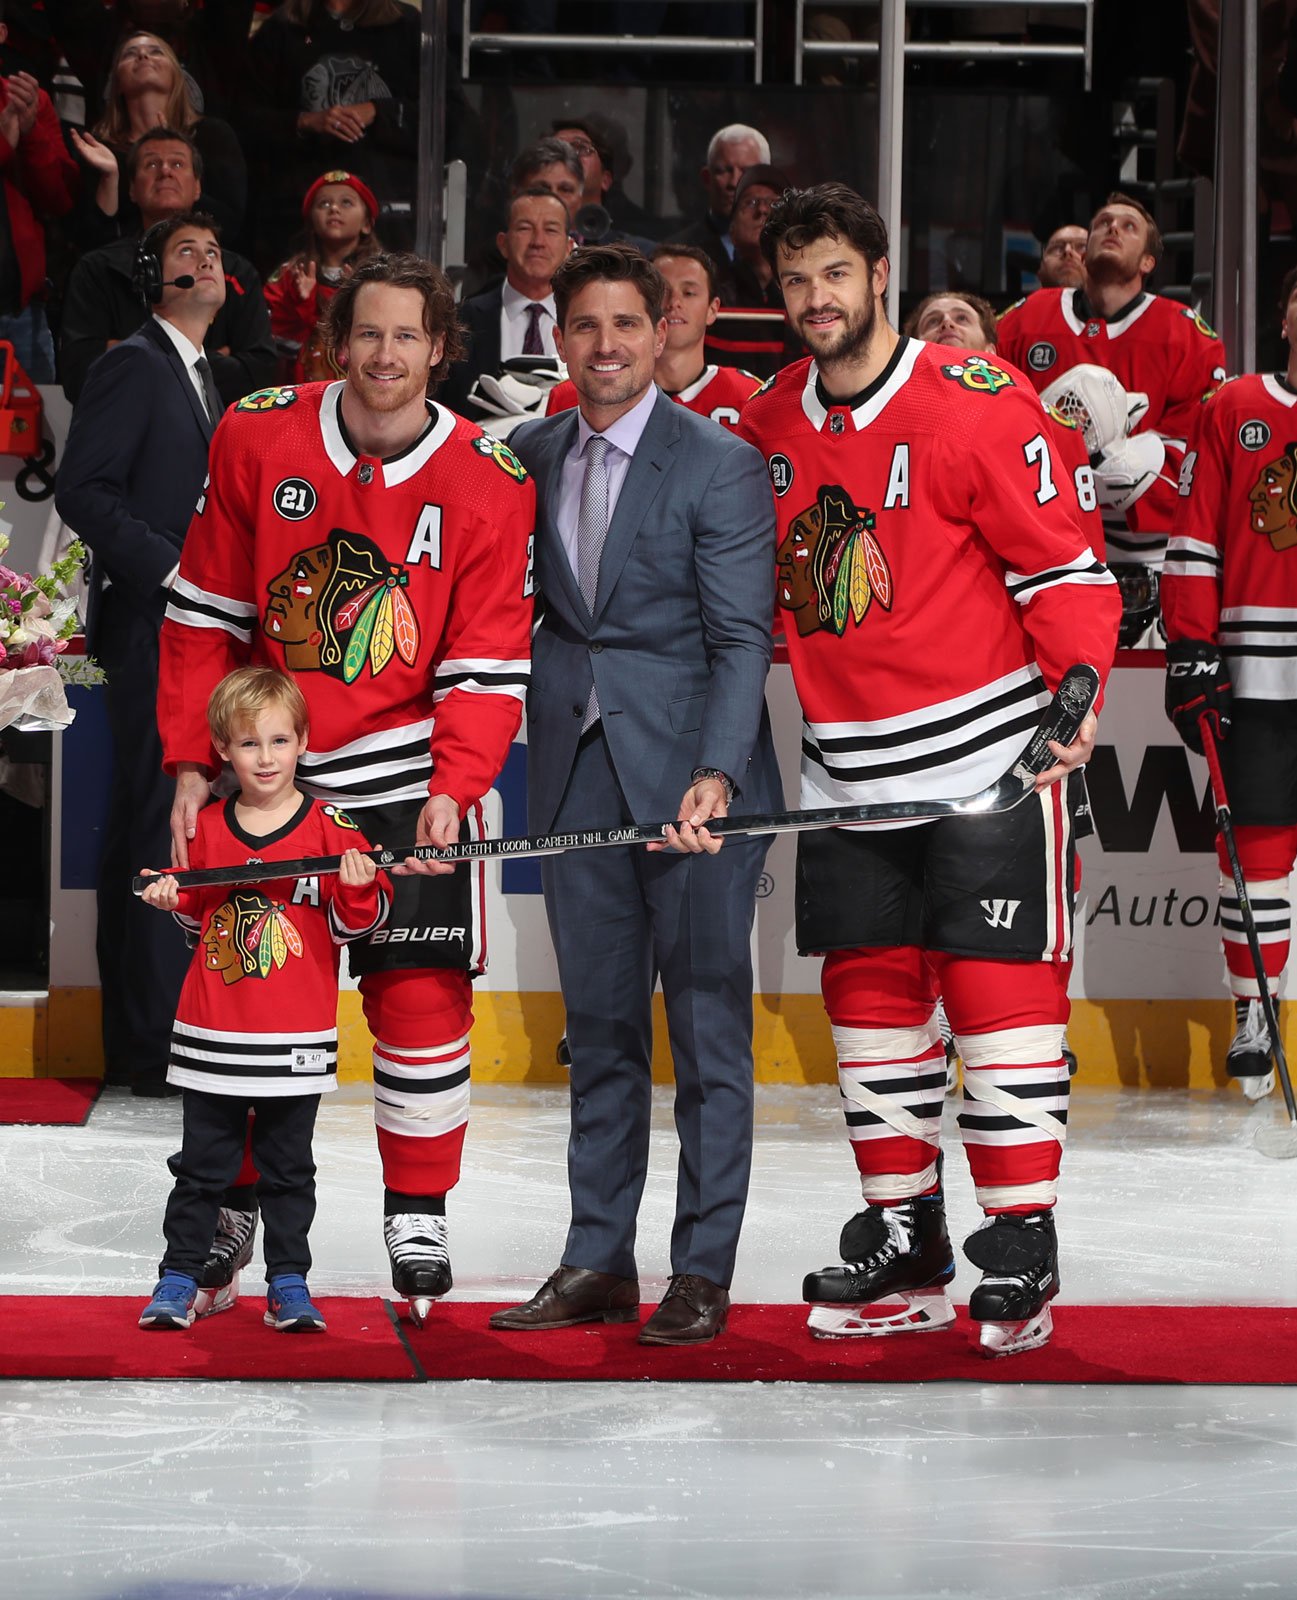 Watch Patrick Sharp's daughter sum up the Blackhawks dynasty in